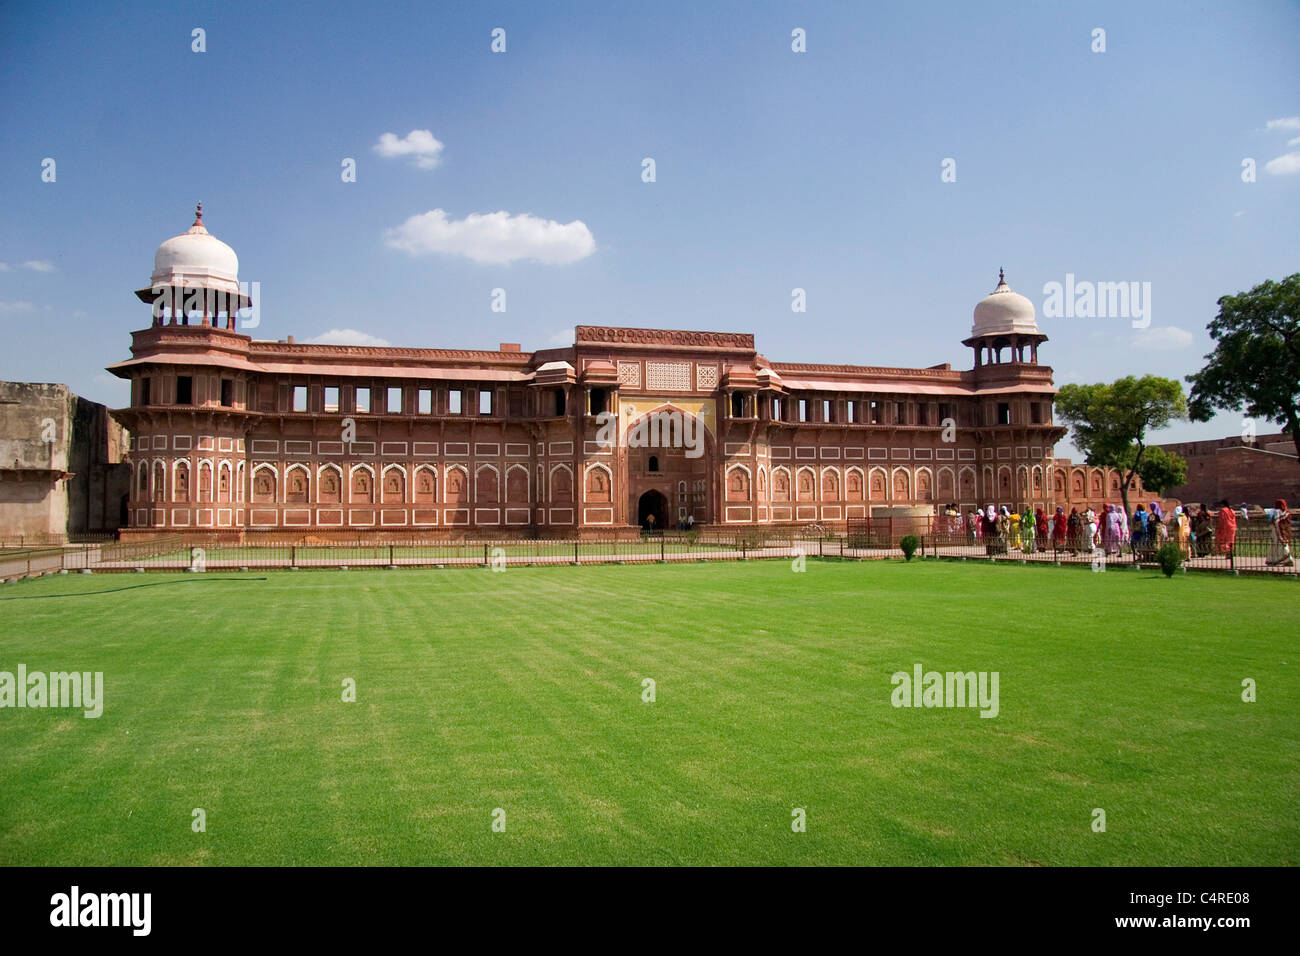 The Agra Fort in Agra, India Stock Photo